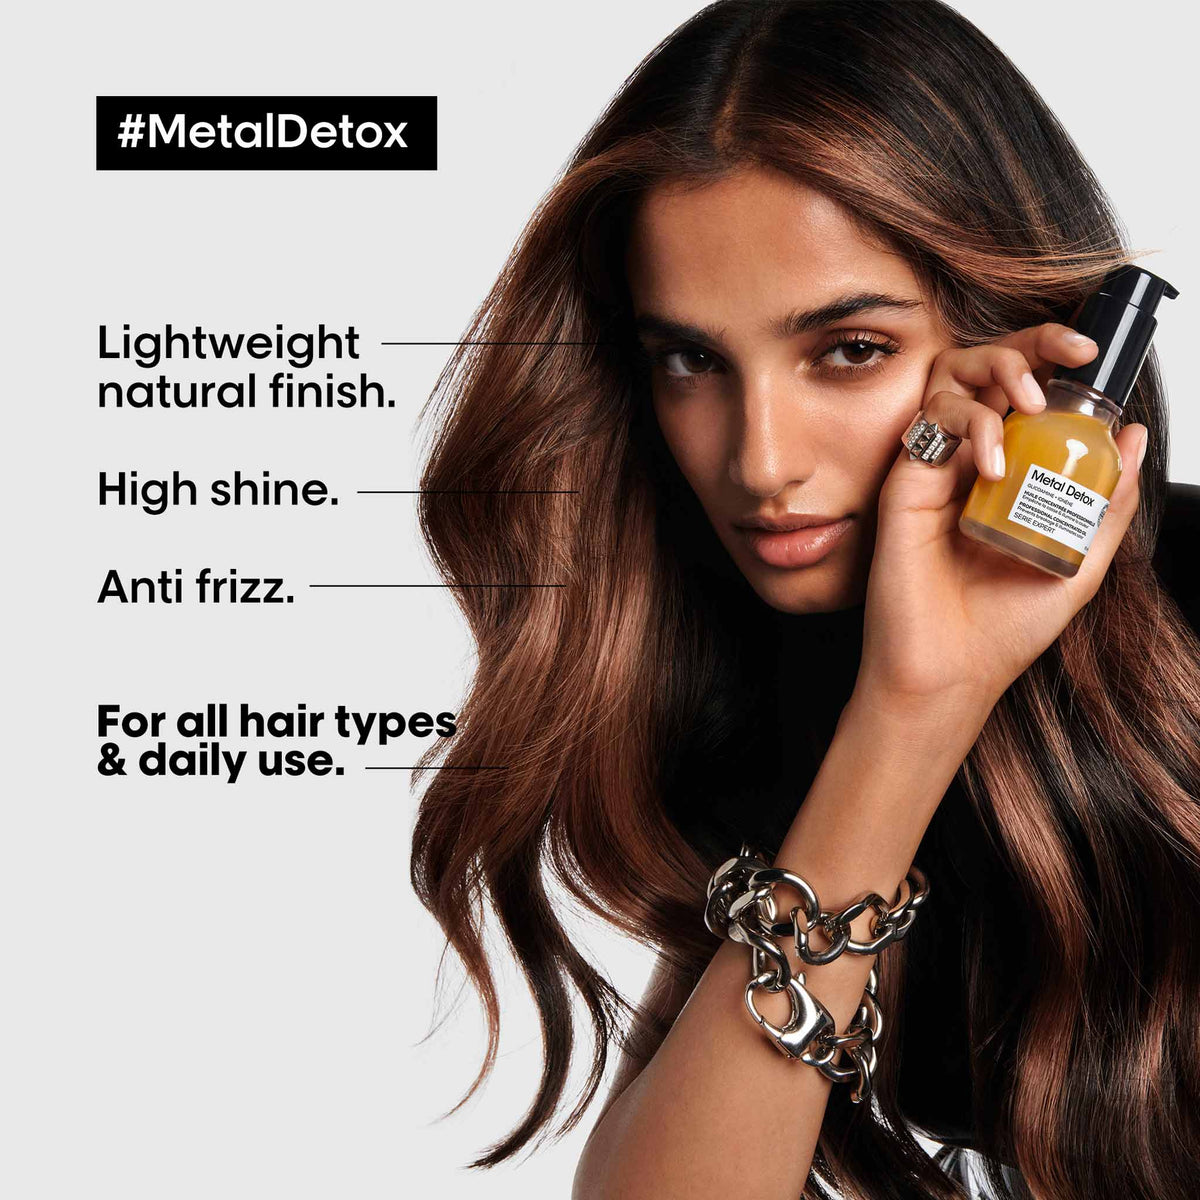 L&#39;Oreal Professionnel Metal Detox Lightweight Concentrated Oil 50ml